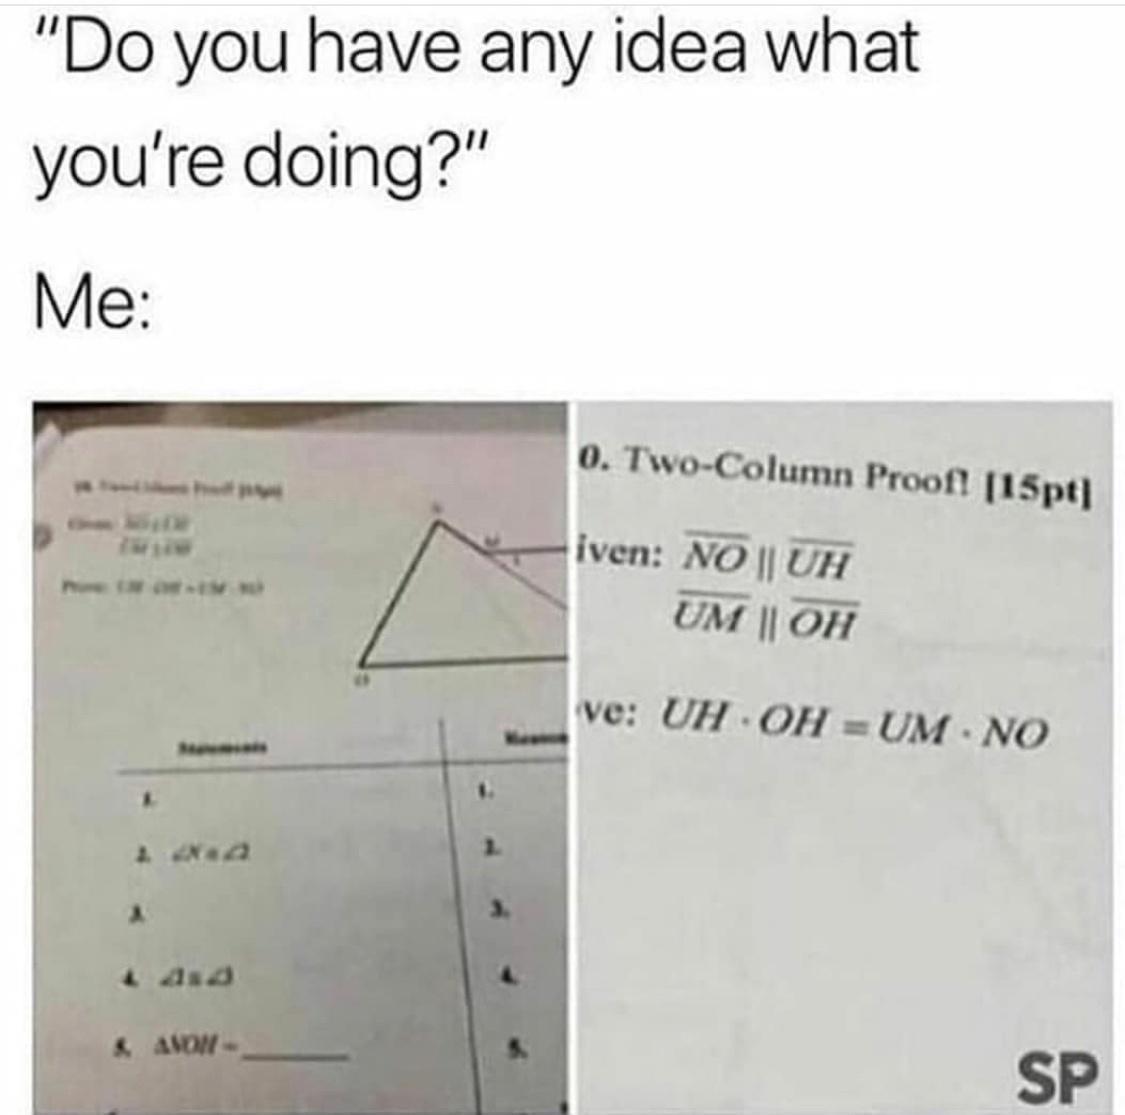 funny memes - dank memes - diagram - "Do you have any idea what you're doing?" Me 0. TwoColumn Proofl 15pt iven No||Uh Um || Oh ve Uh Oh Umno Avon Sp